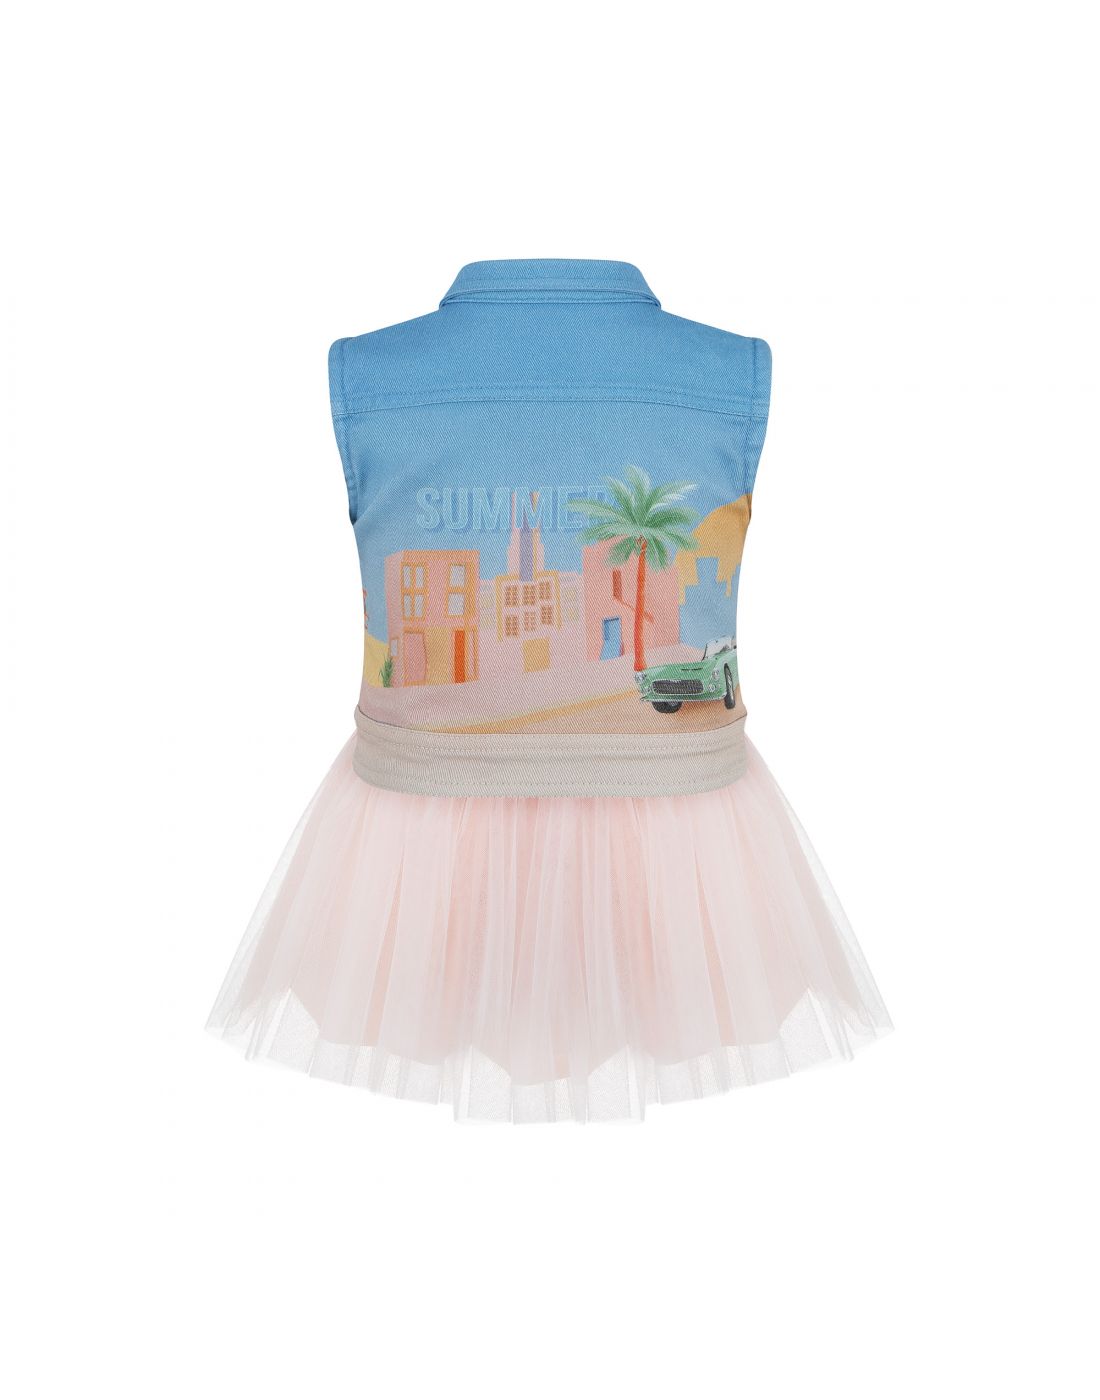 Lapin House with Vest Kids Dress